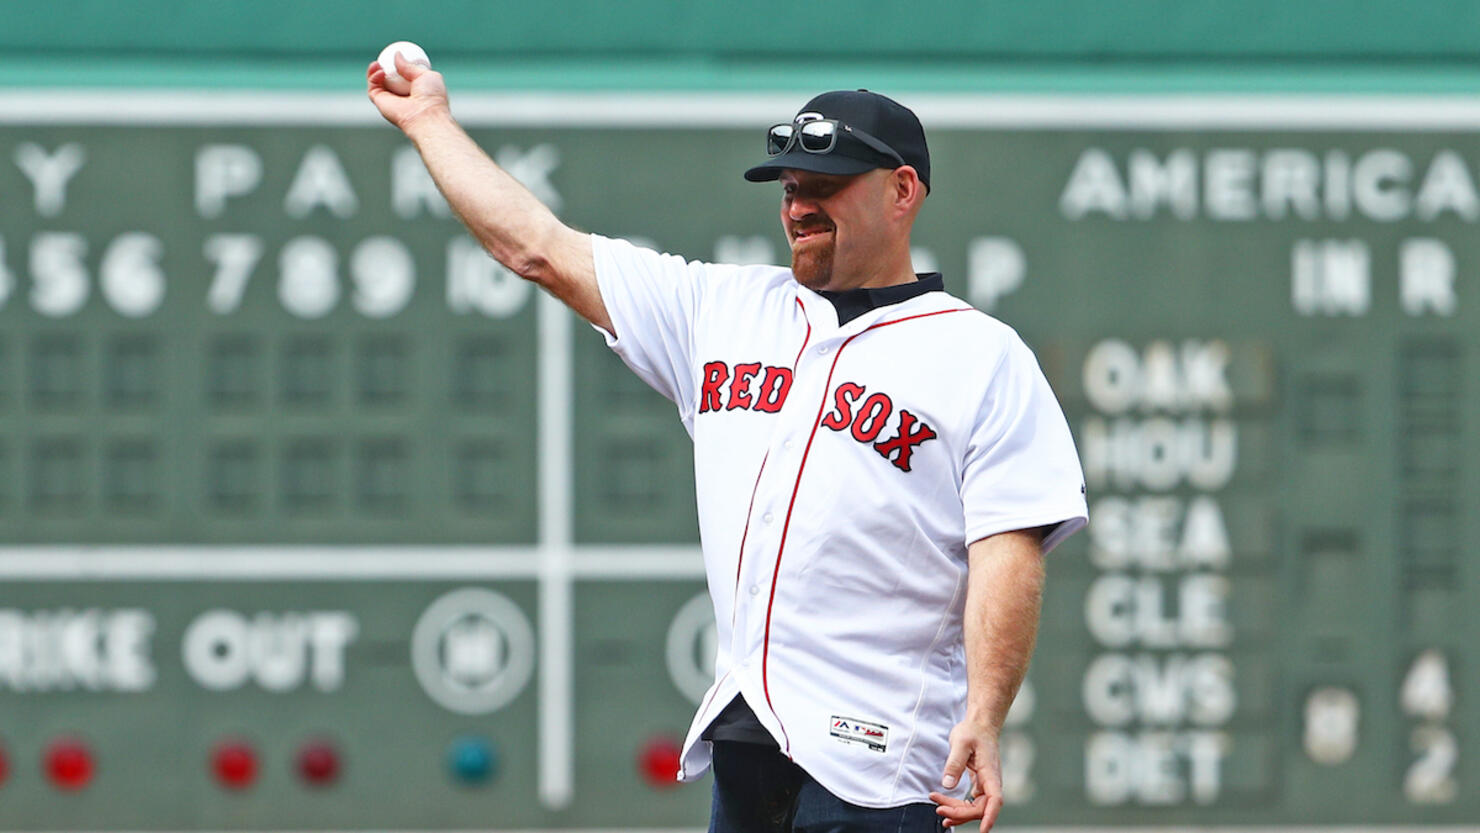 Three-time All-Star Kevin Youkilis retires - Sports Illustrated